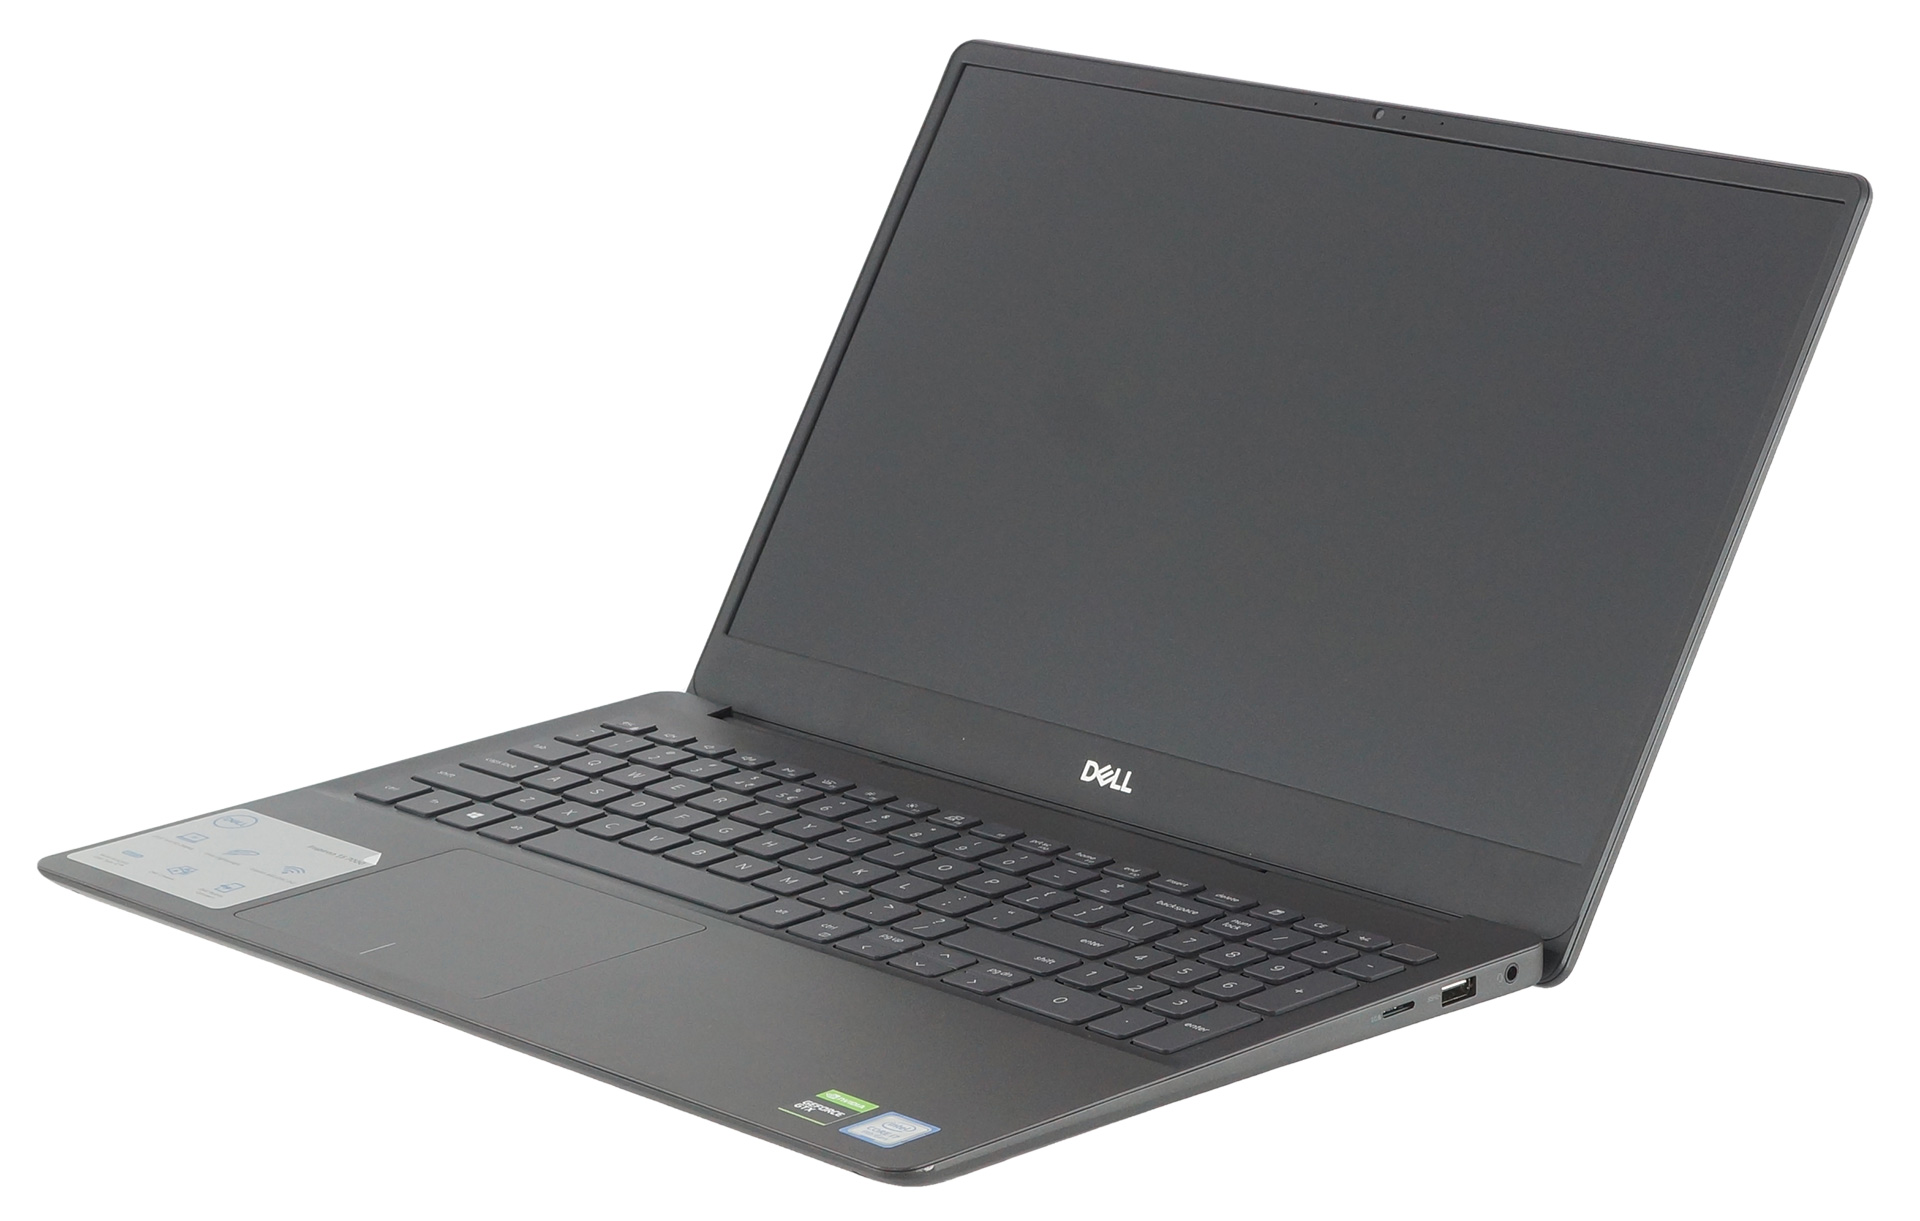 Dell Inspiron 15 7590 review - a premium Inspiron that actually